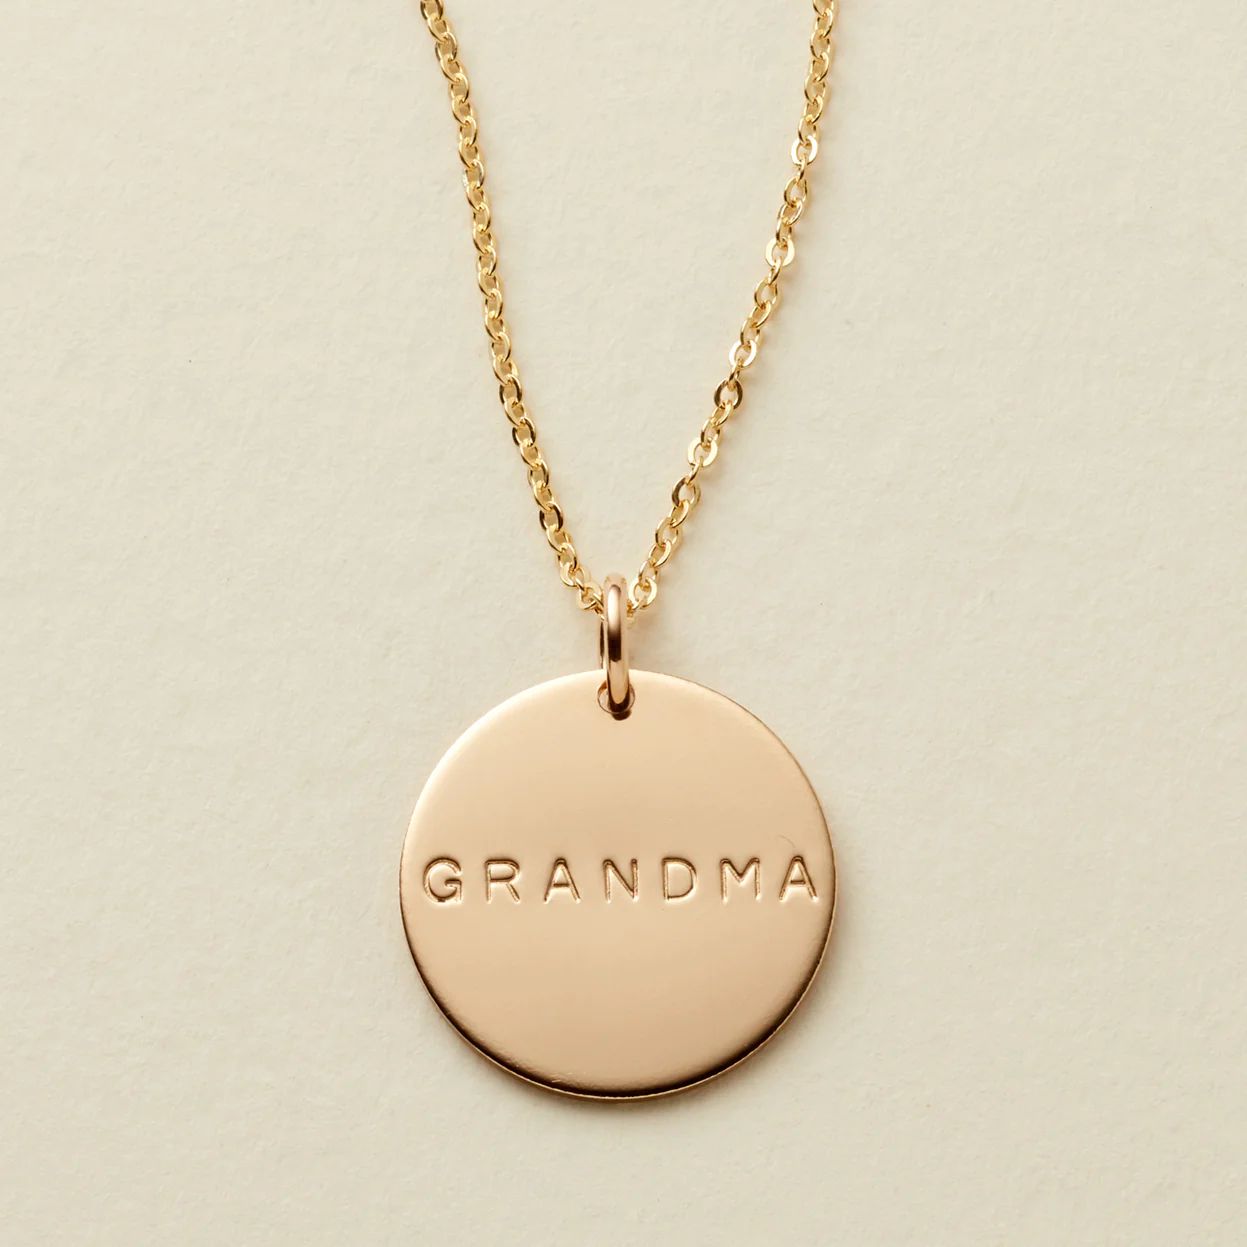 Grandma Disc Necklace - 5/8" | Made by Mary (US)